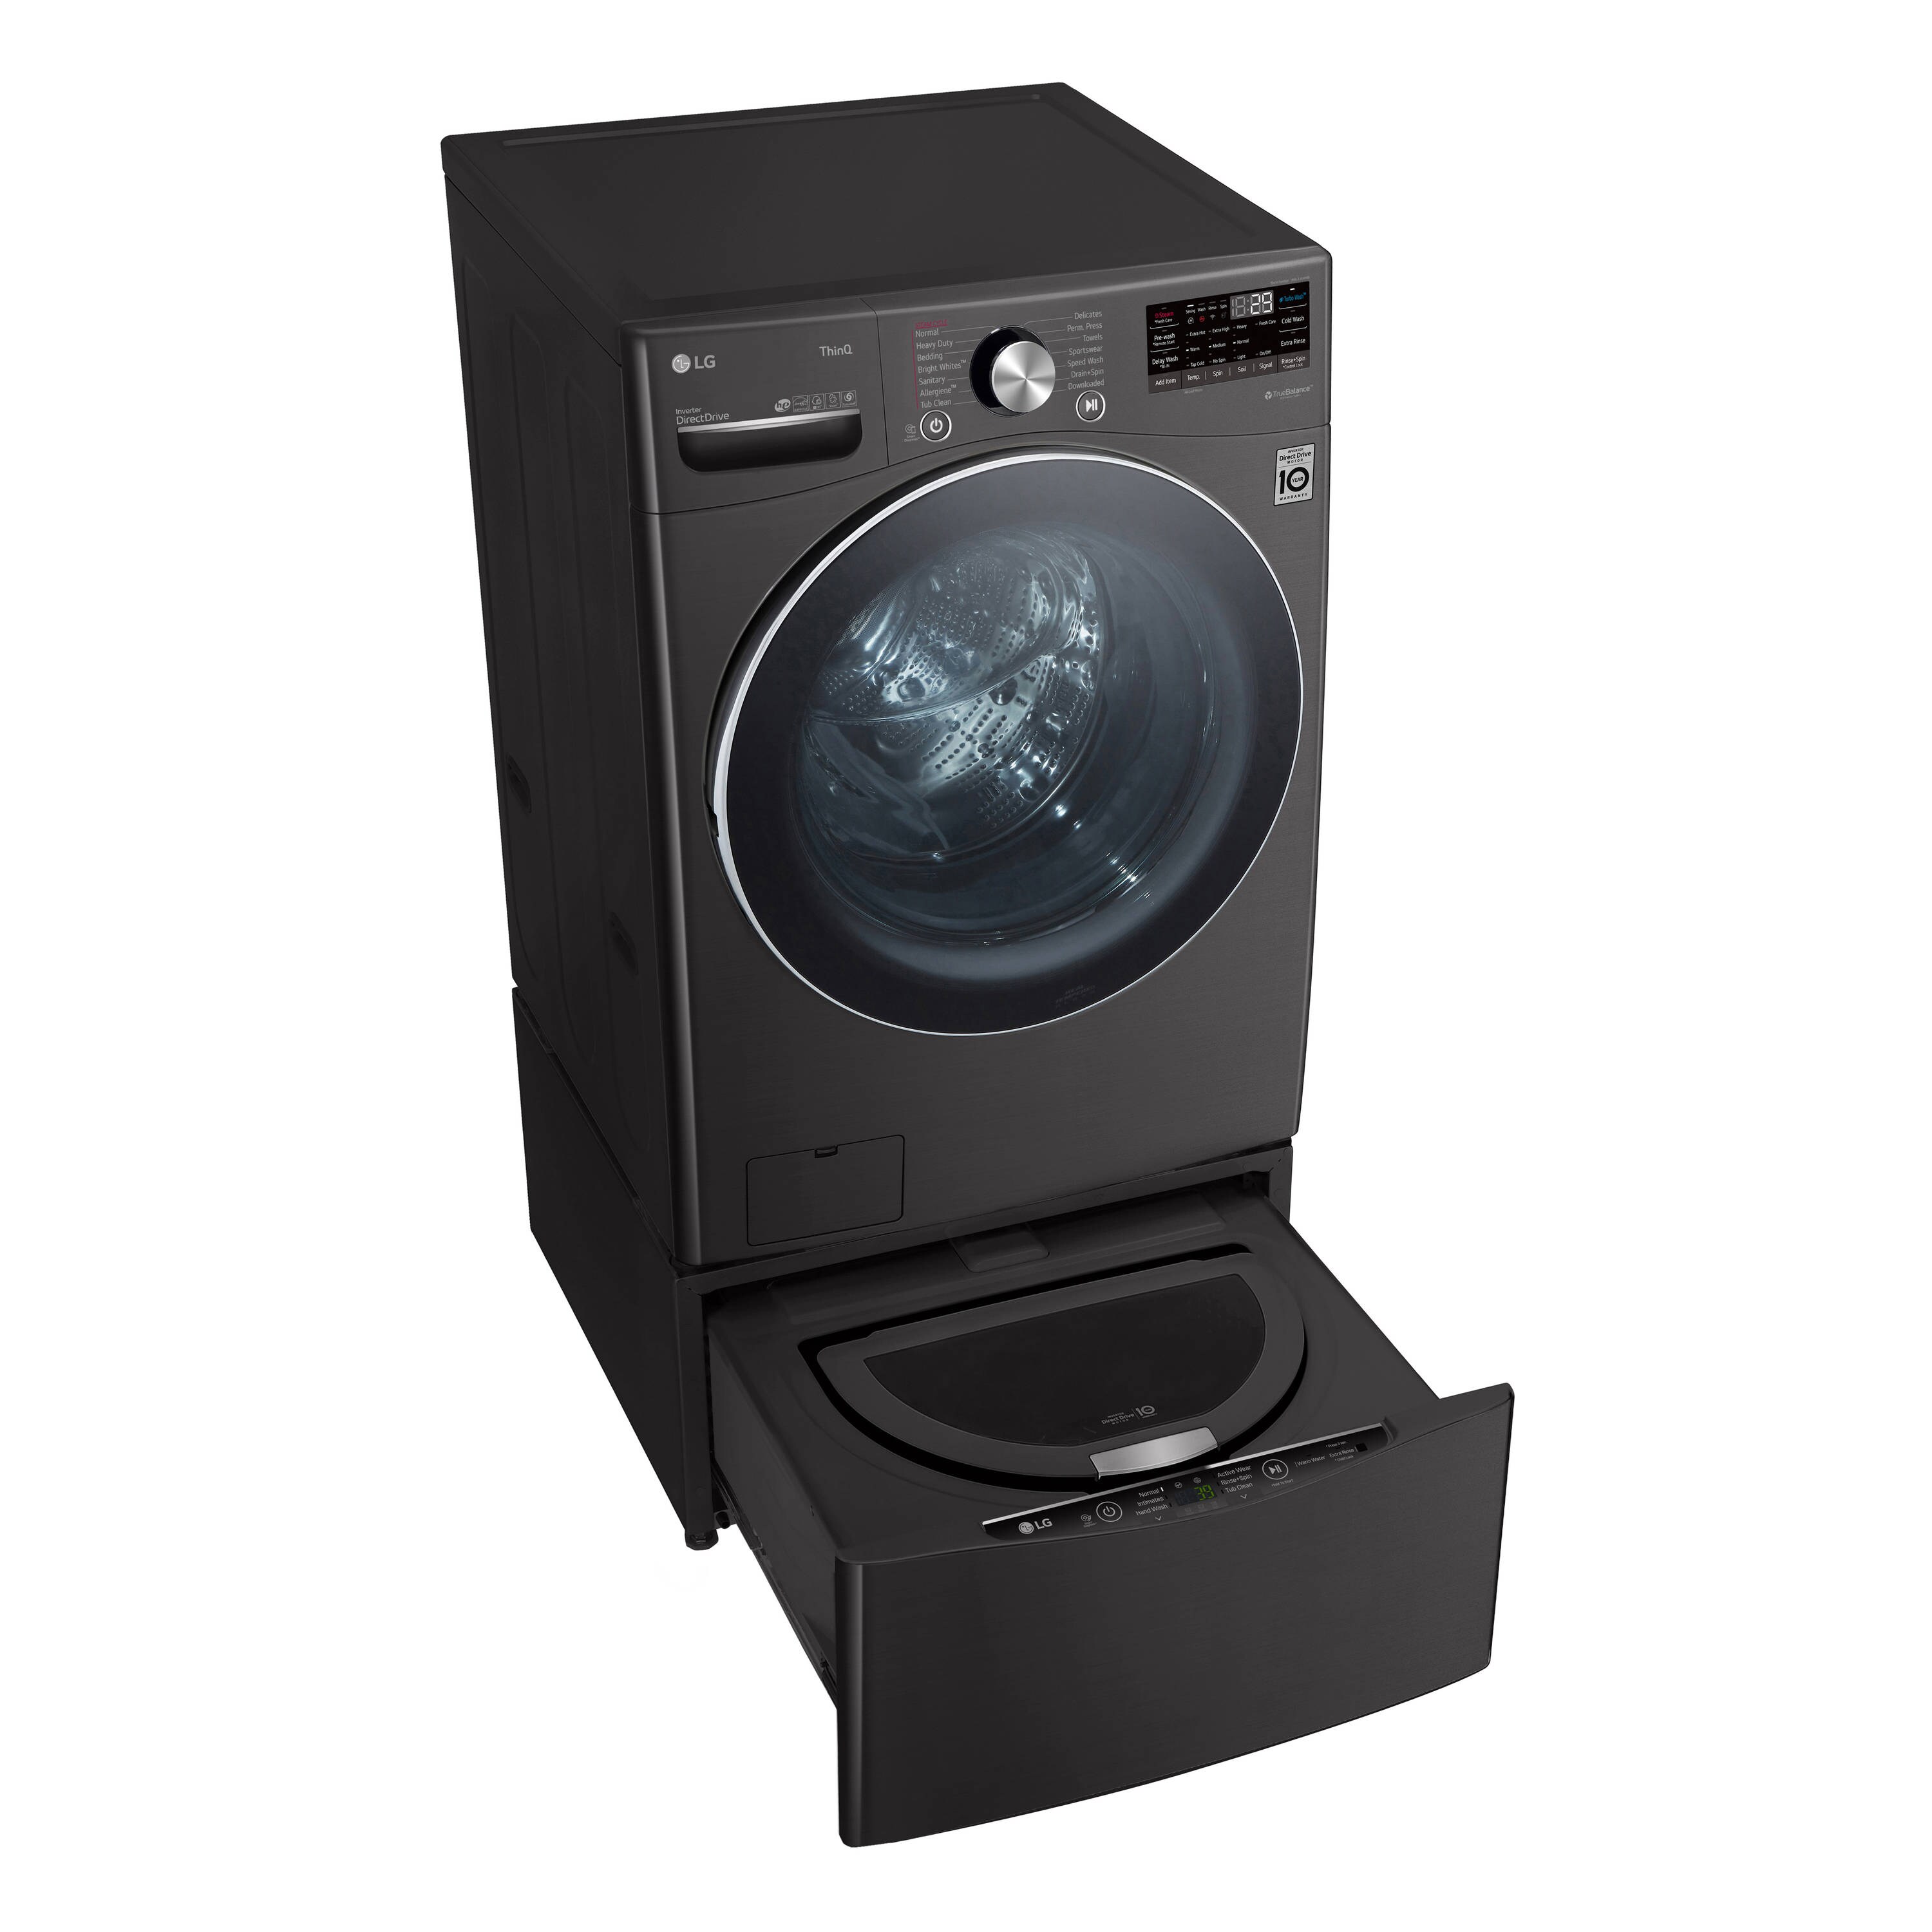 LG 5-cu ft Stackable Steam Cycle Smart Front-Load Washer (Black Steel)  ENERGY STAR